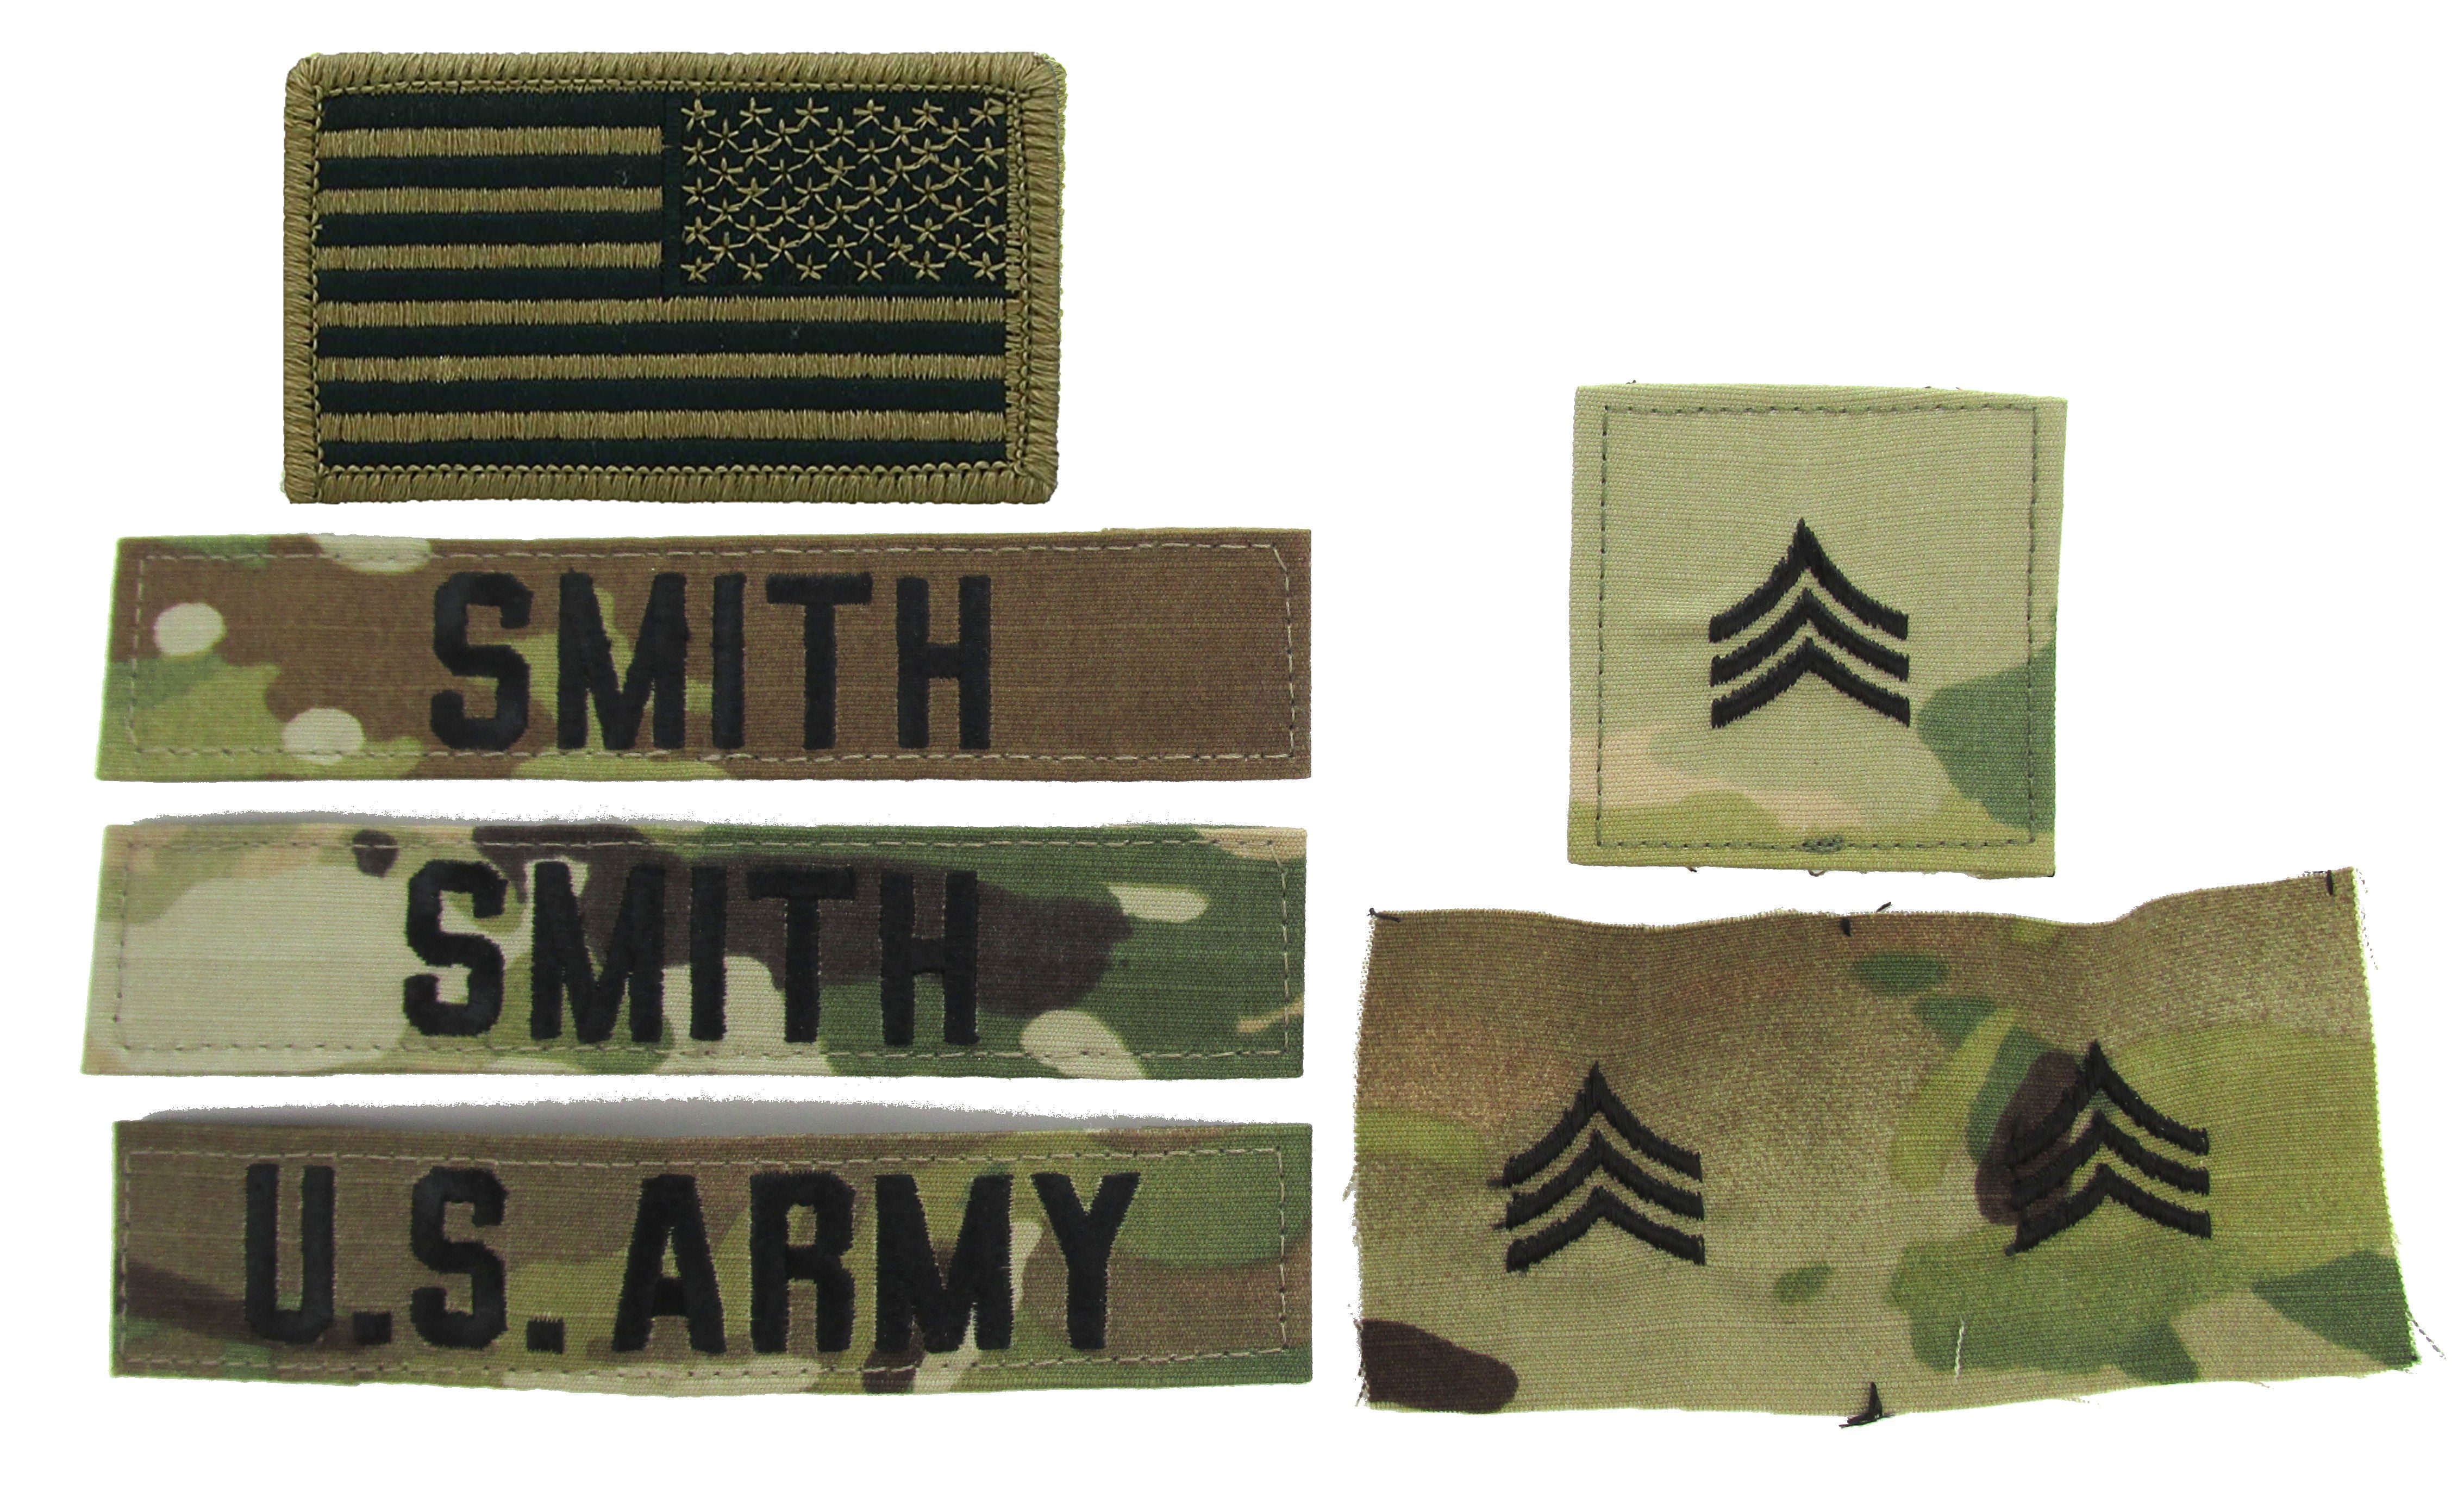 U.S. Army OCP Name Tape Rank Insignia - Package Deal, WO5 - Warrant Officer 5 - Black